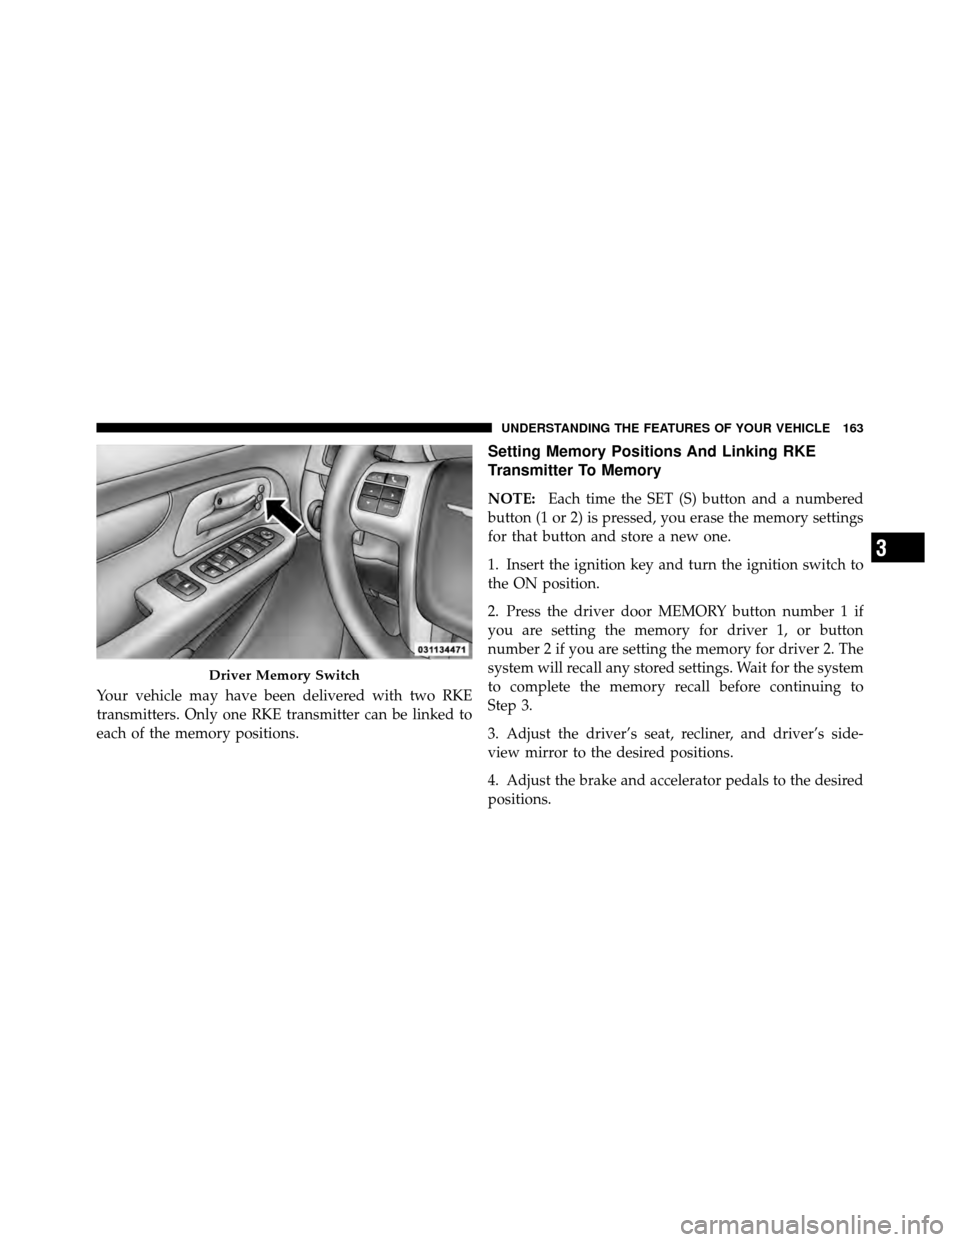 CHRYSLER TOWN AND COUNTRY 2011 5.G Owners Manual Your vehicle may have been delivered with two RKE
transmitters. Only one RKE transmitter can be linked to
each of the memory positions.
Setting Memory Positions And Linking RKE
Transmitter To Memory
N